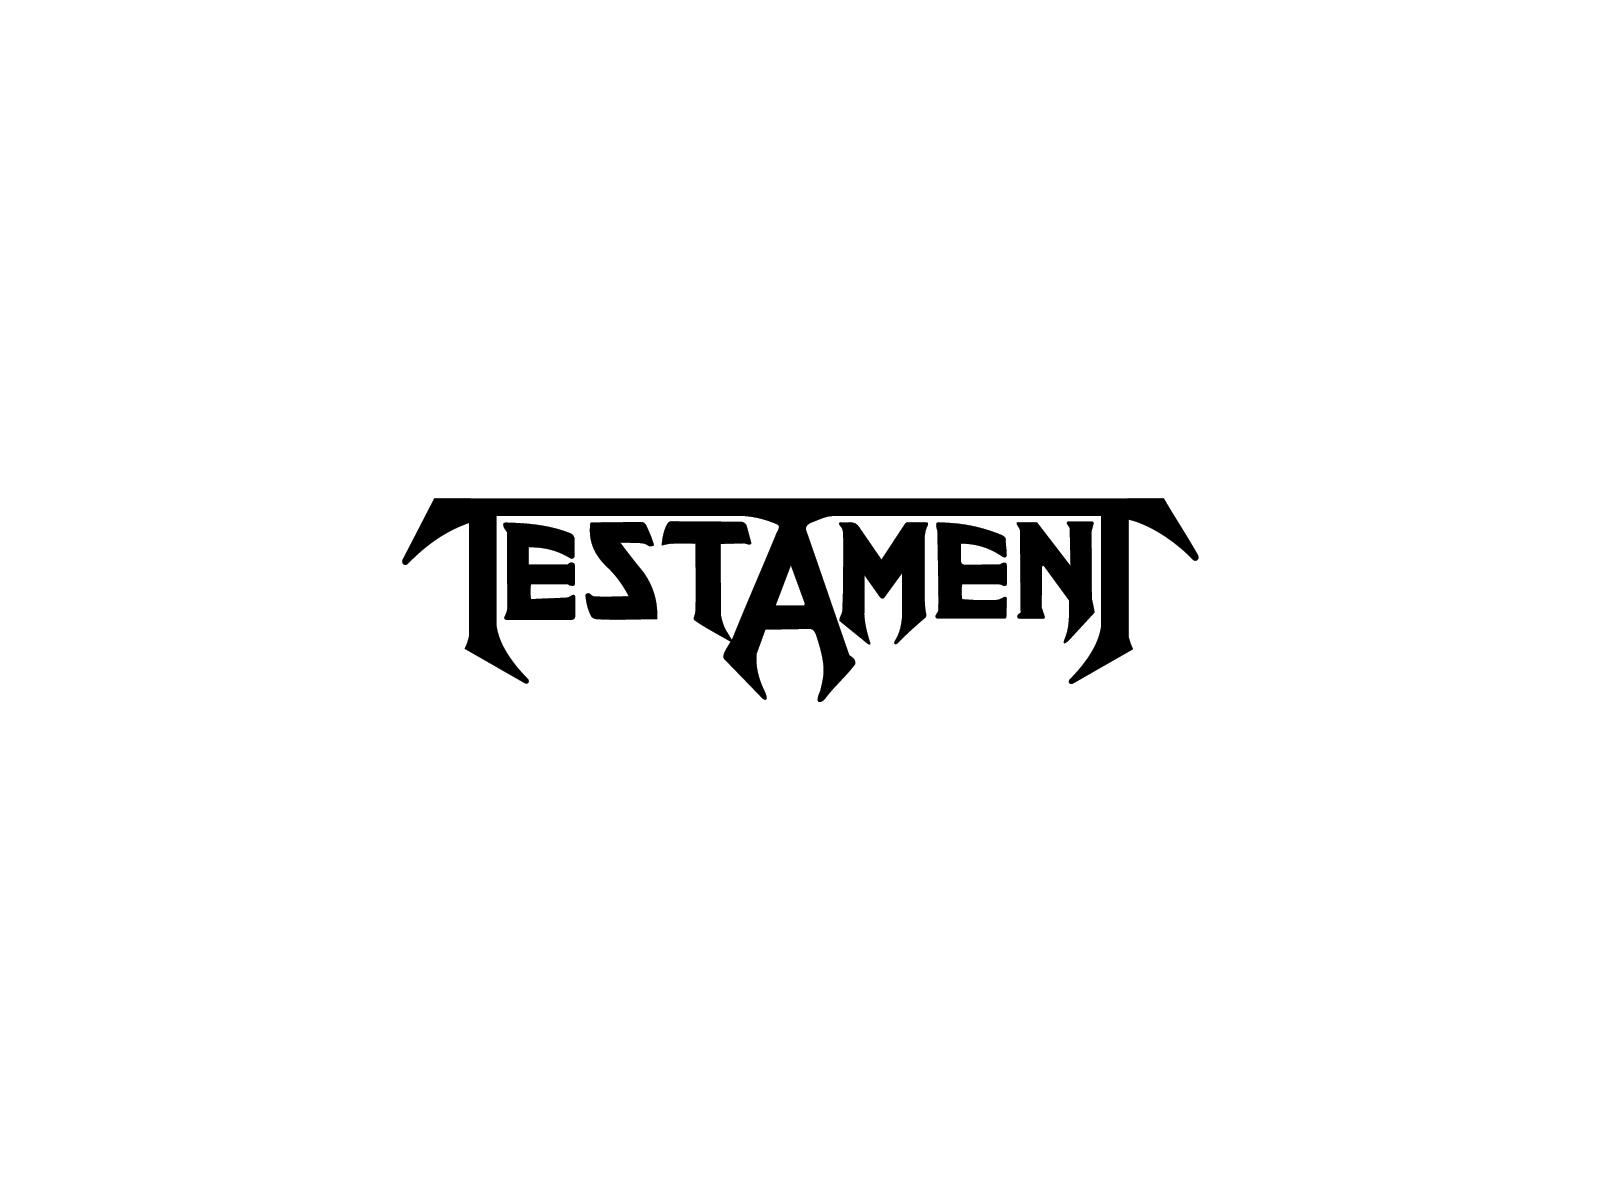 Top Testament Background Nuc83 Awesome Wallpaper